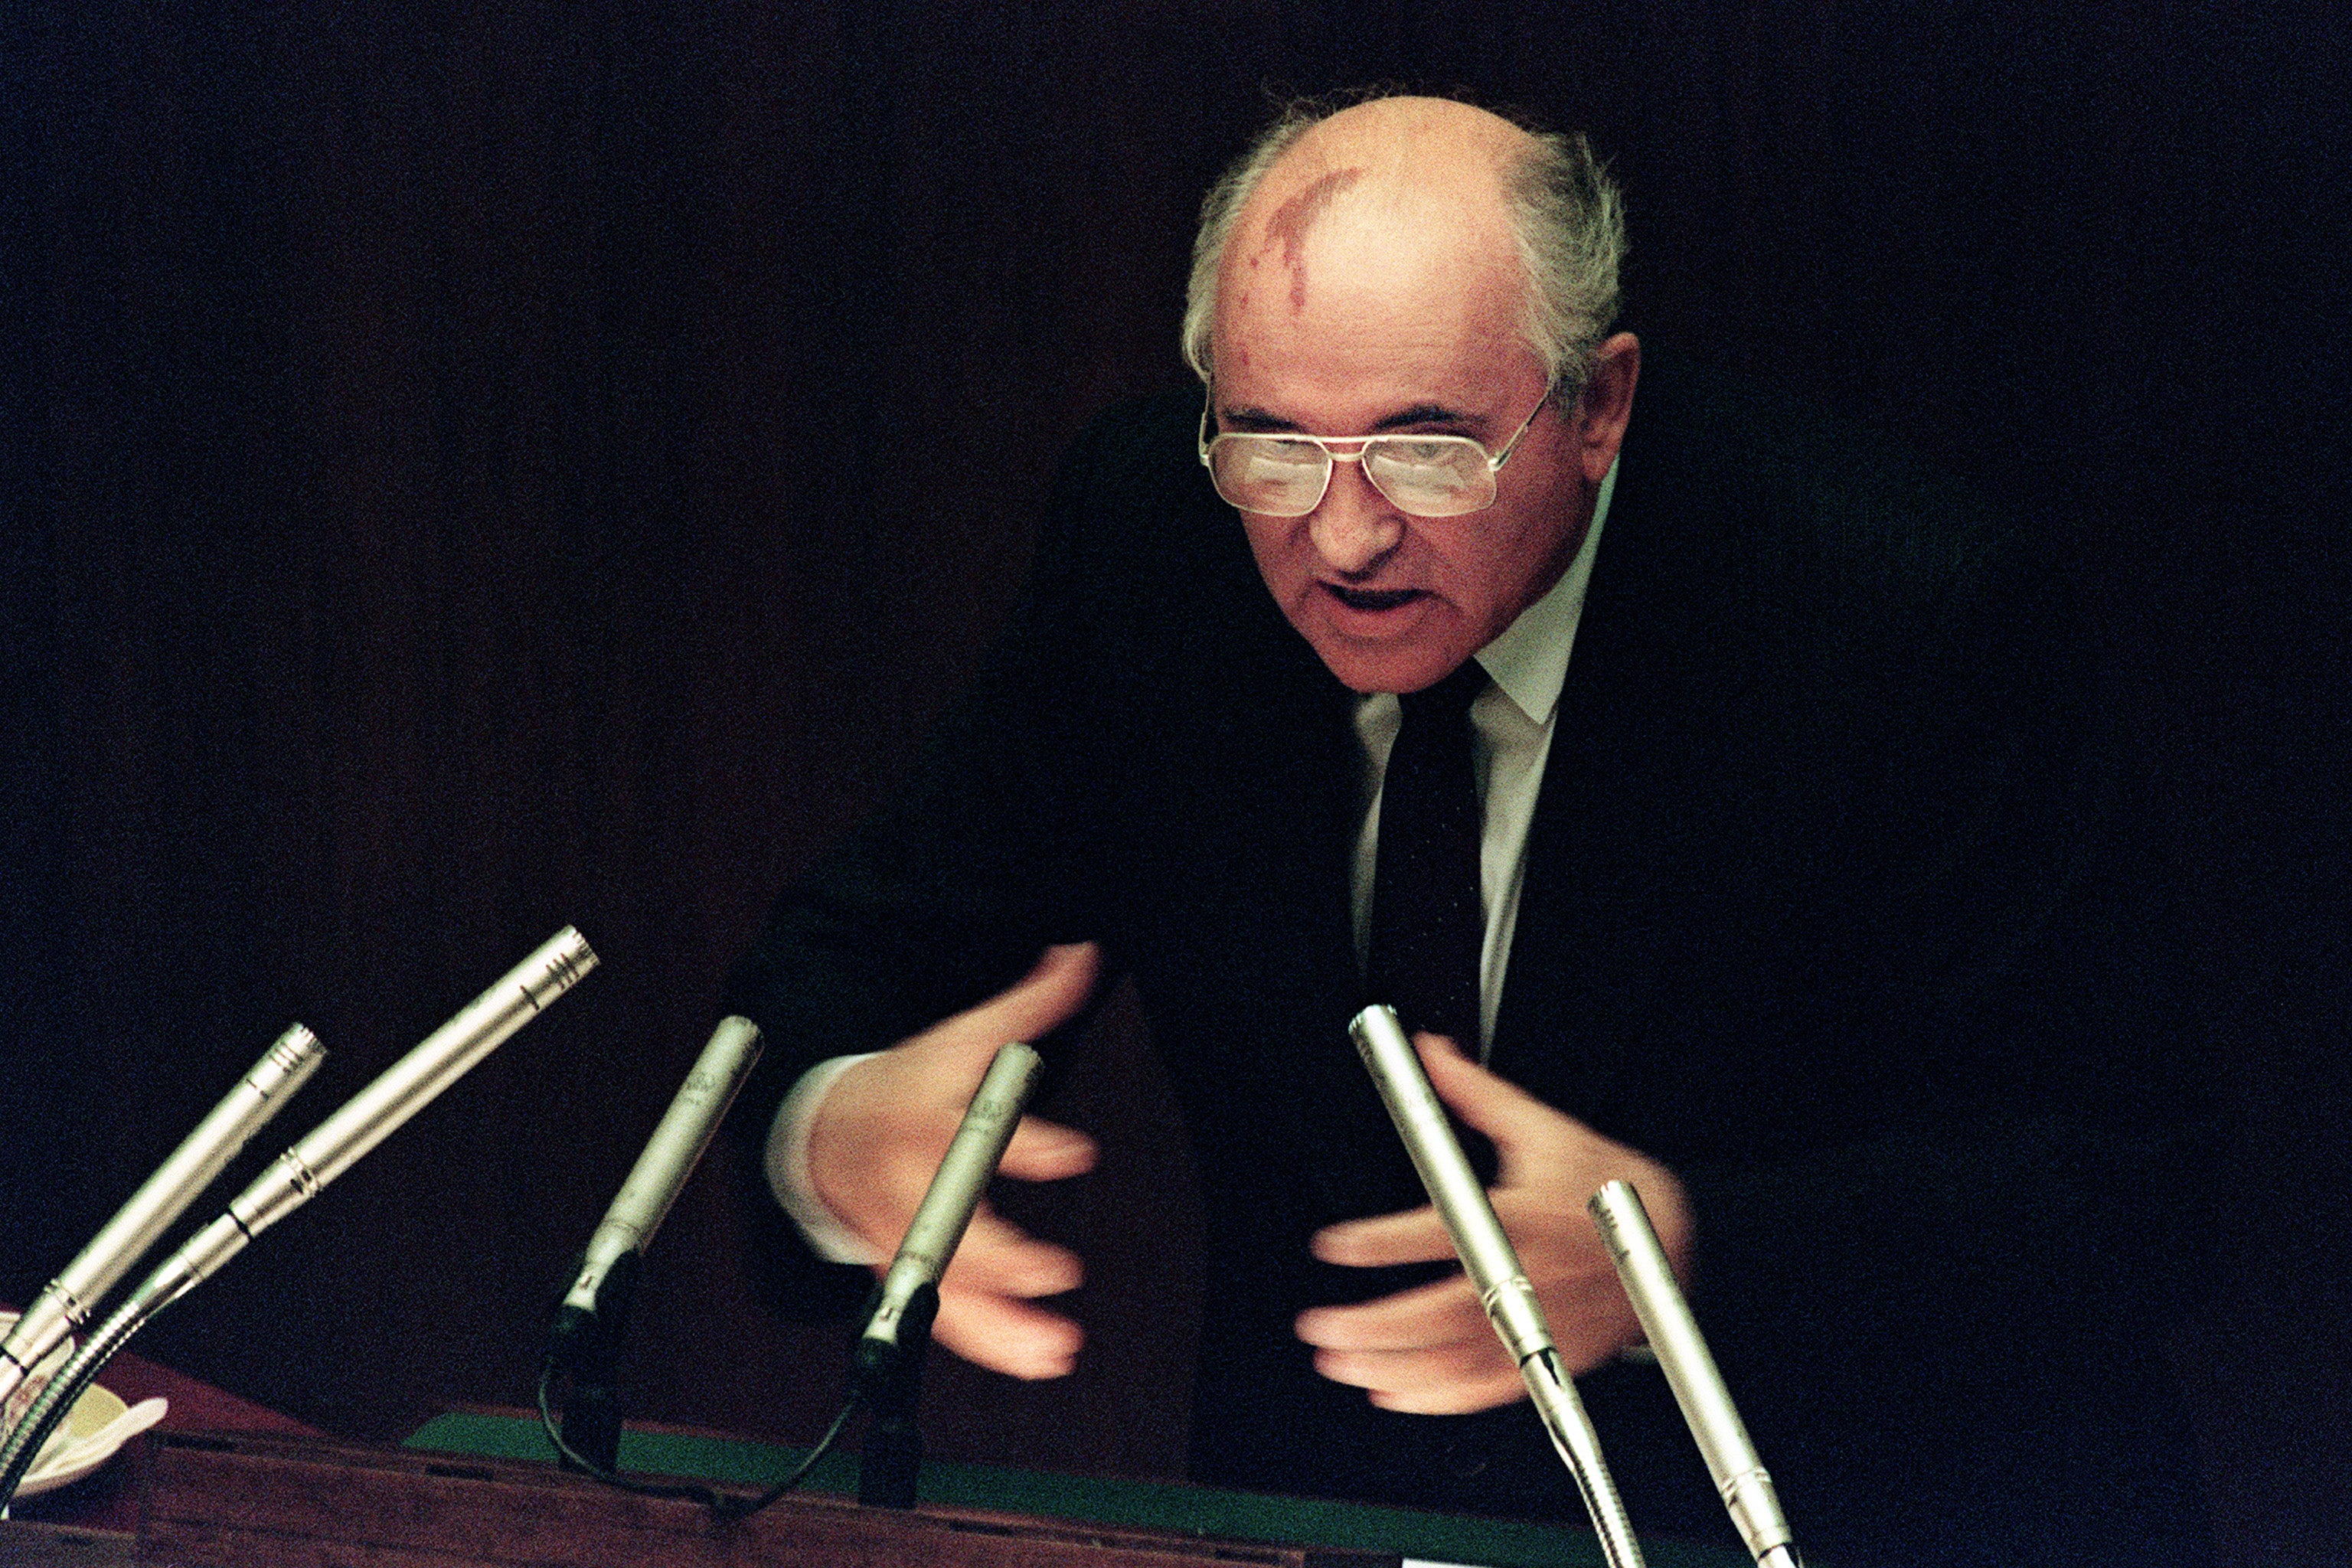 Former Soviet president Mikhail Gorbachev at the extraordinary session of the Supreme Soviet in Moscow on 27 August 1991. The coup attempt would have lasting implications for Russia and the Soviet Union